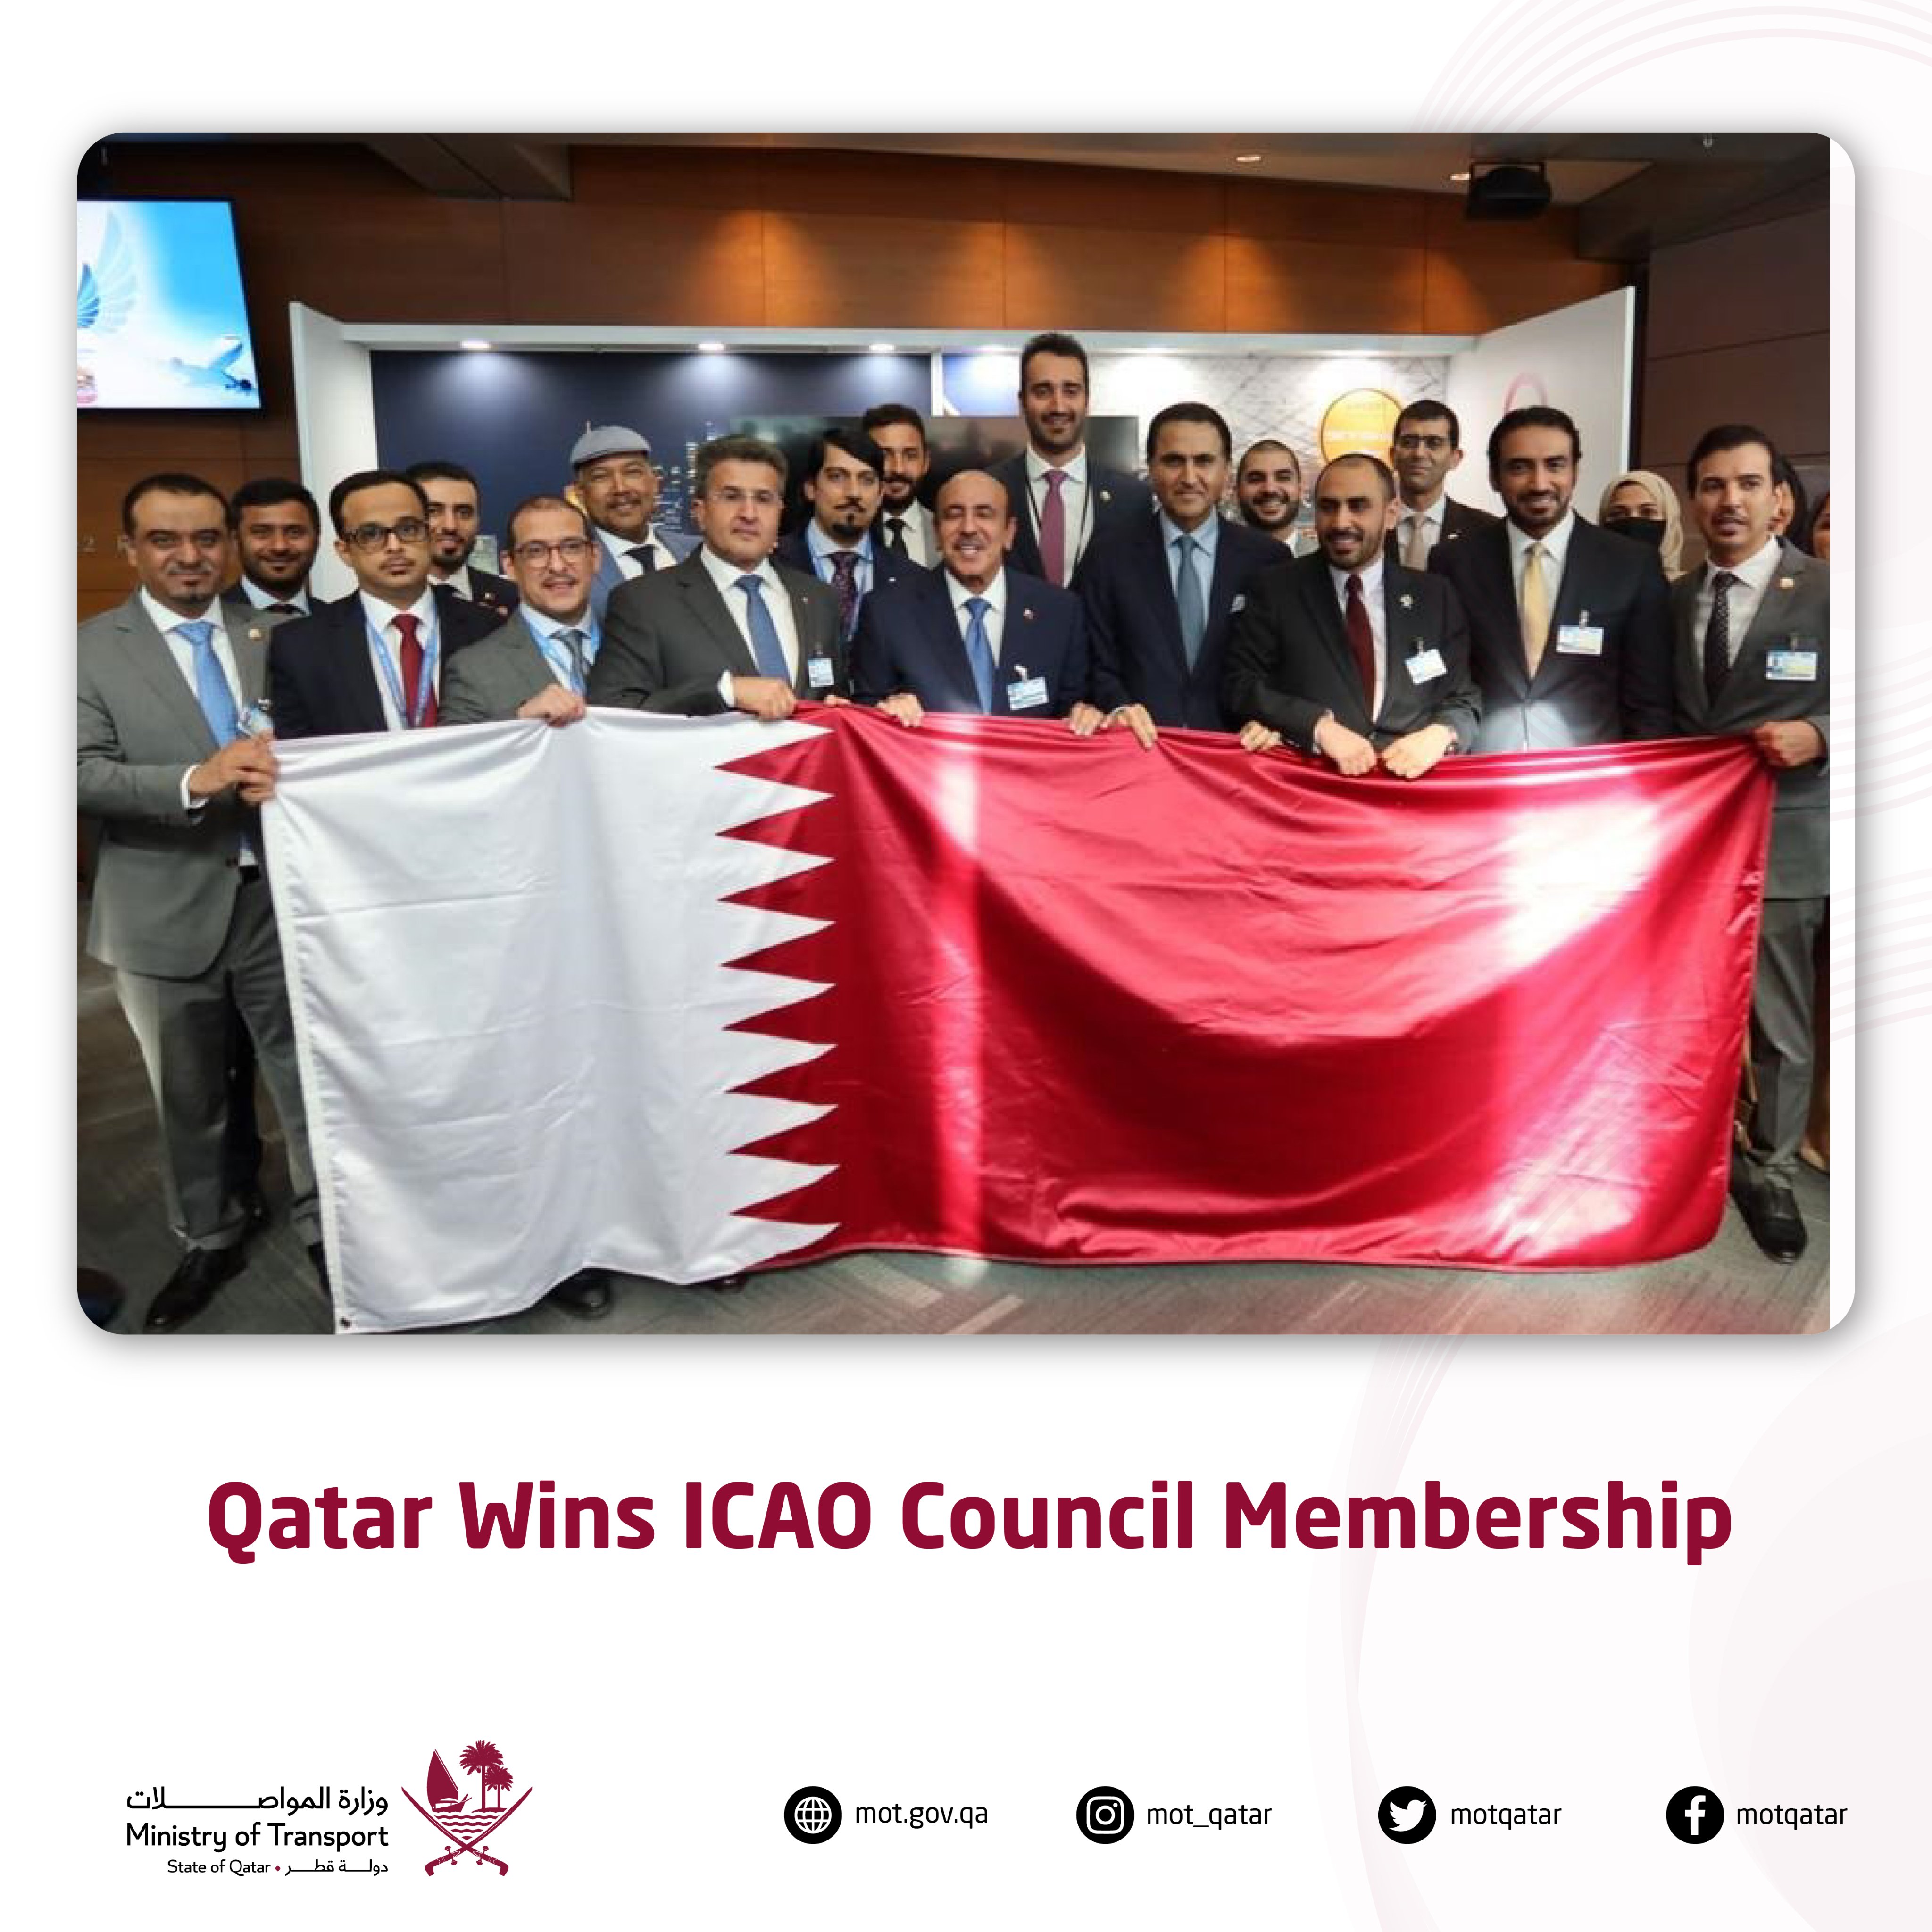 Qatar won the membership of the International Civil Aviation Organization (ICAO) Council for the first time in history. 